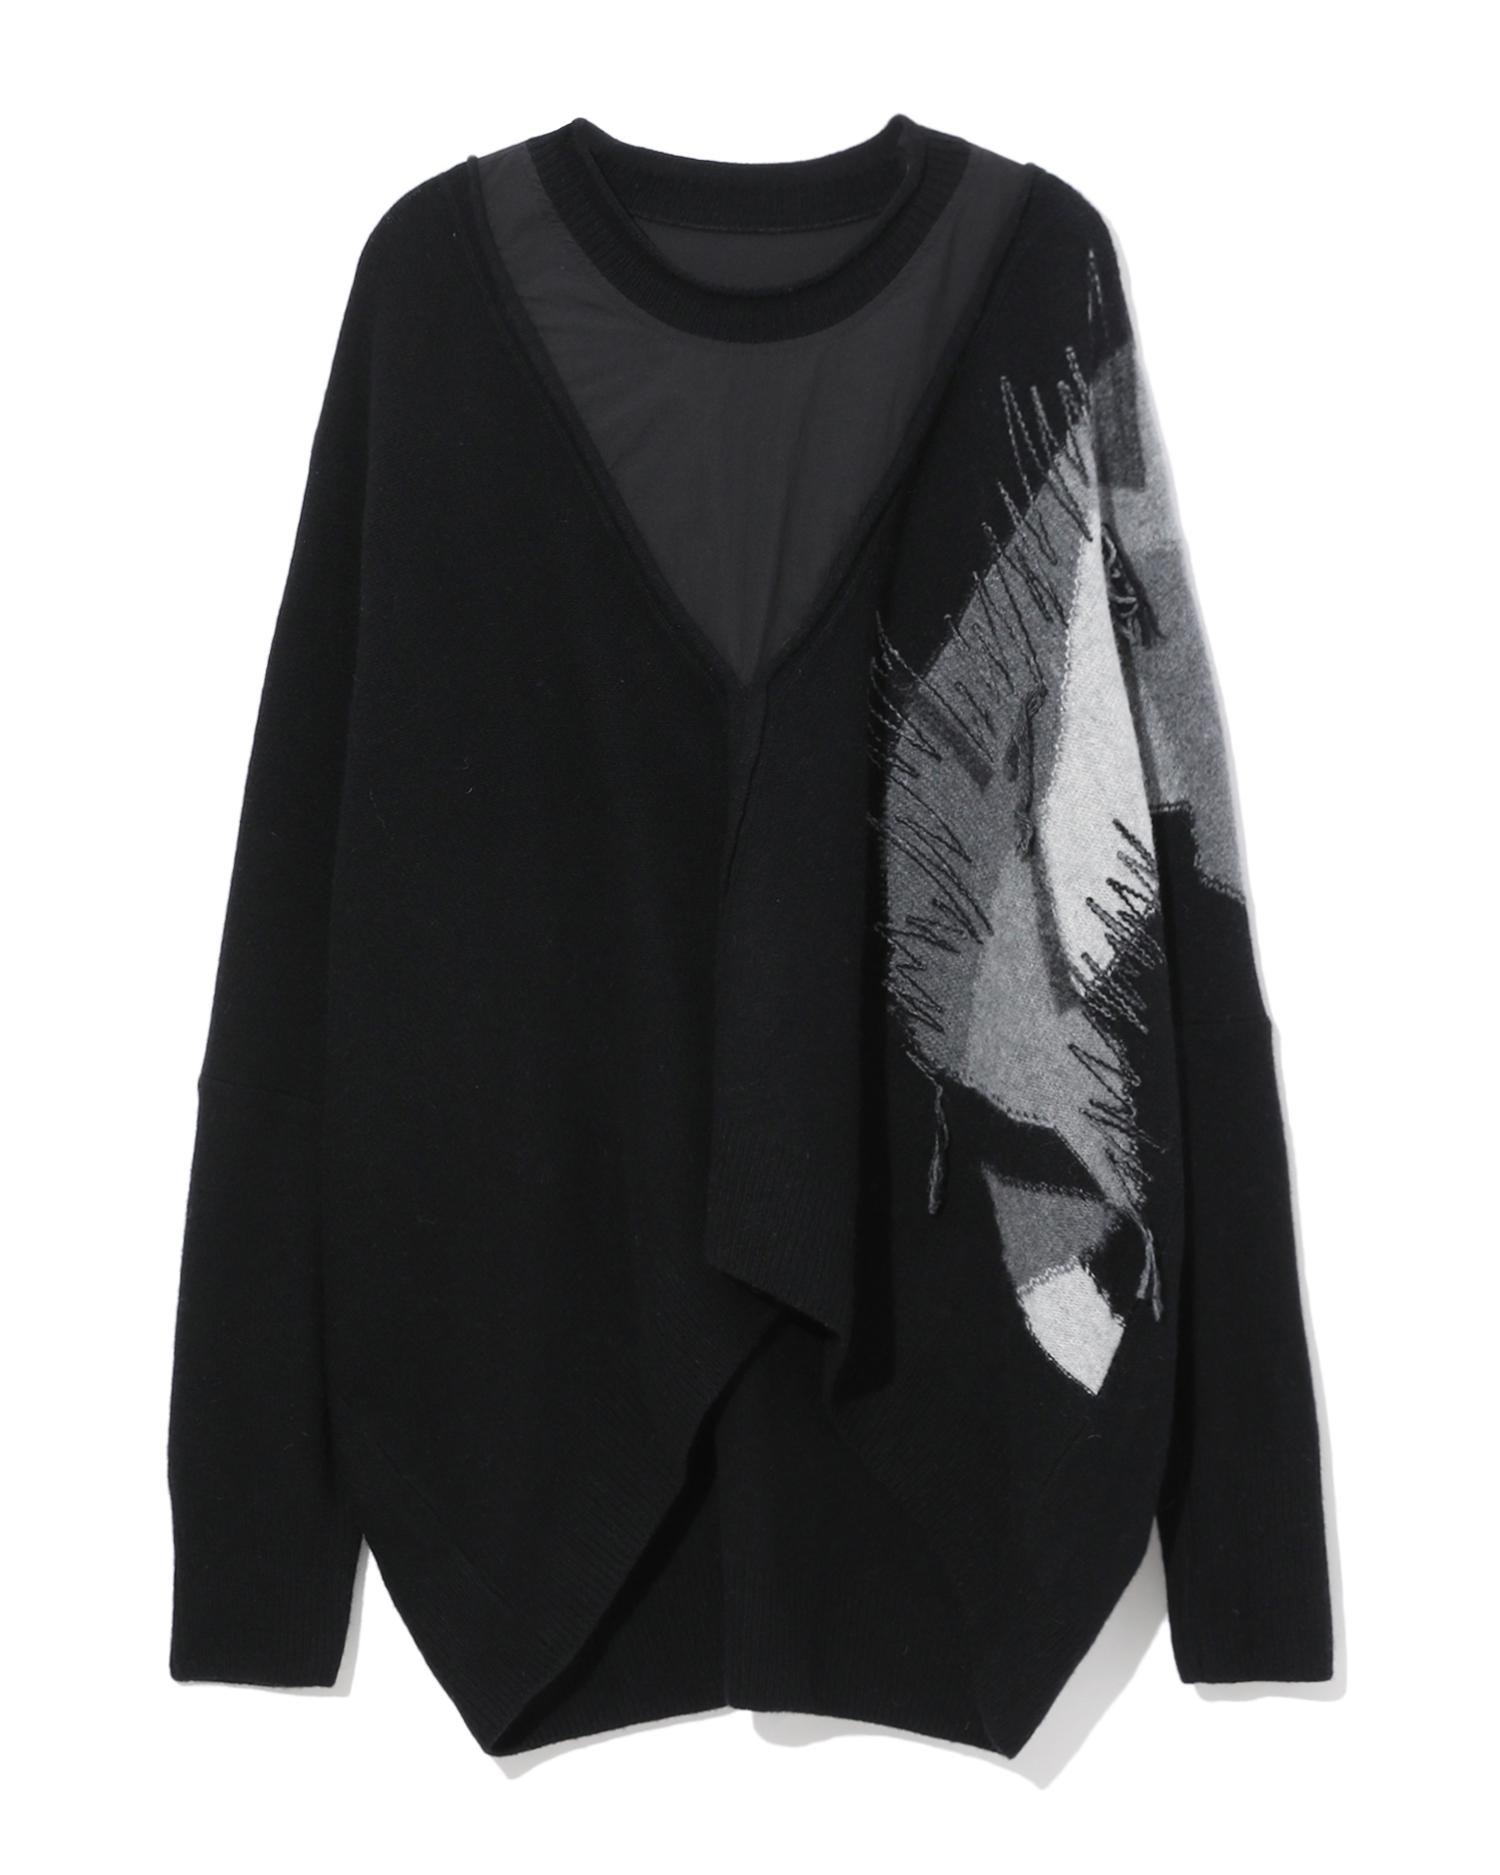 Panelled patchwork sweater by D'DEMOO